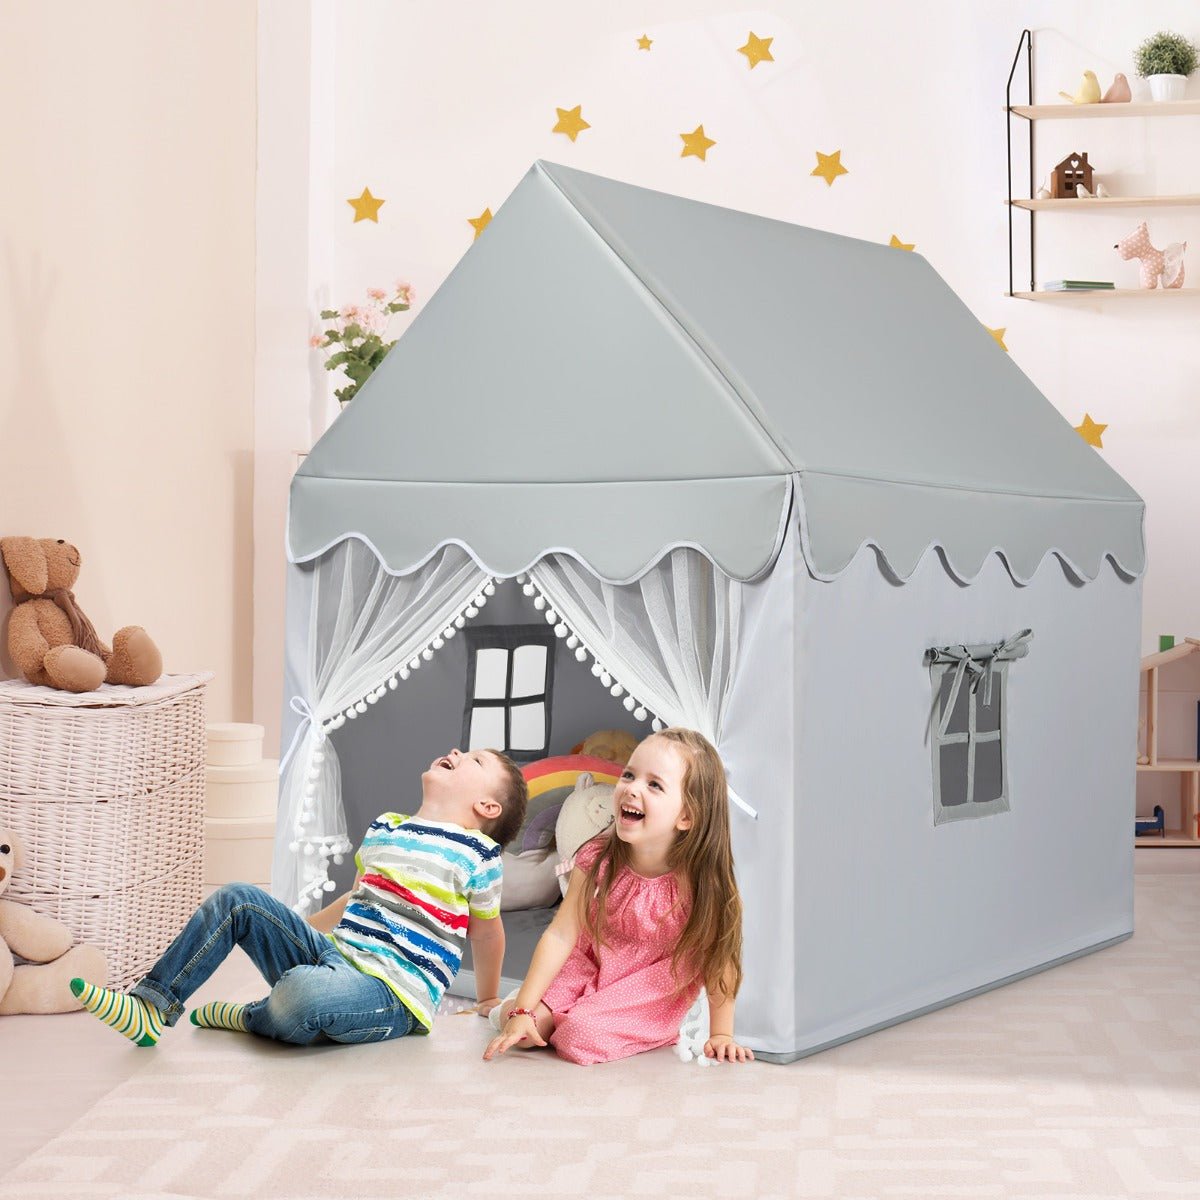 Explore and Play: Grey Kids Playhouse with Door and Windows